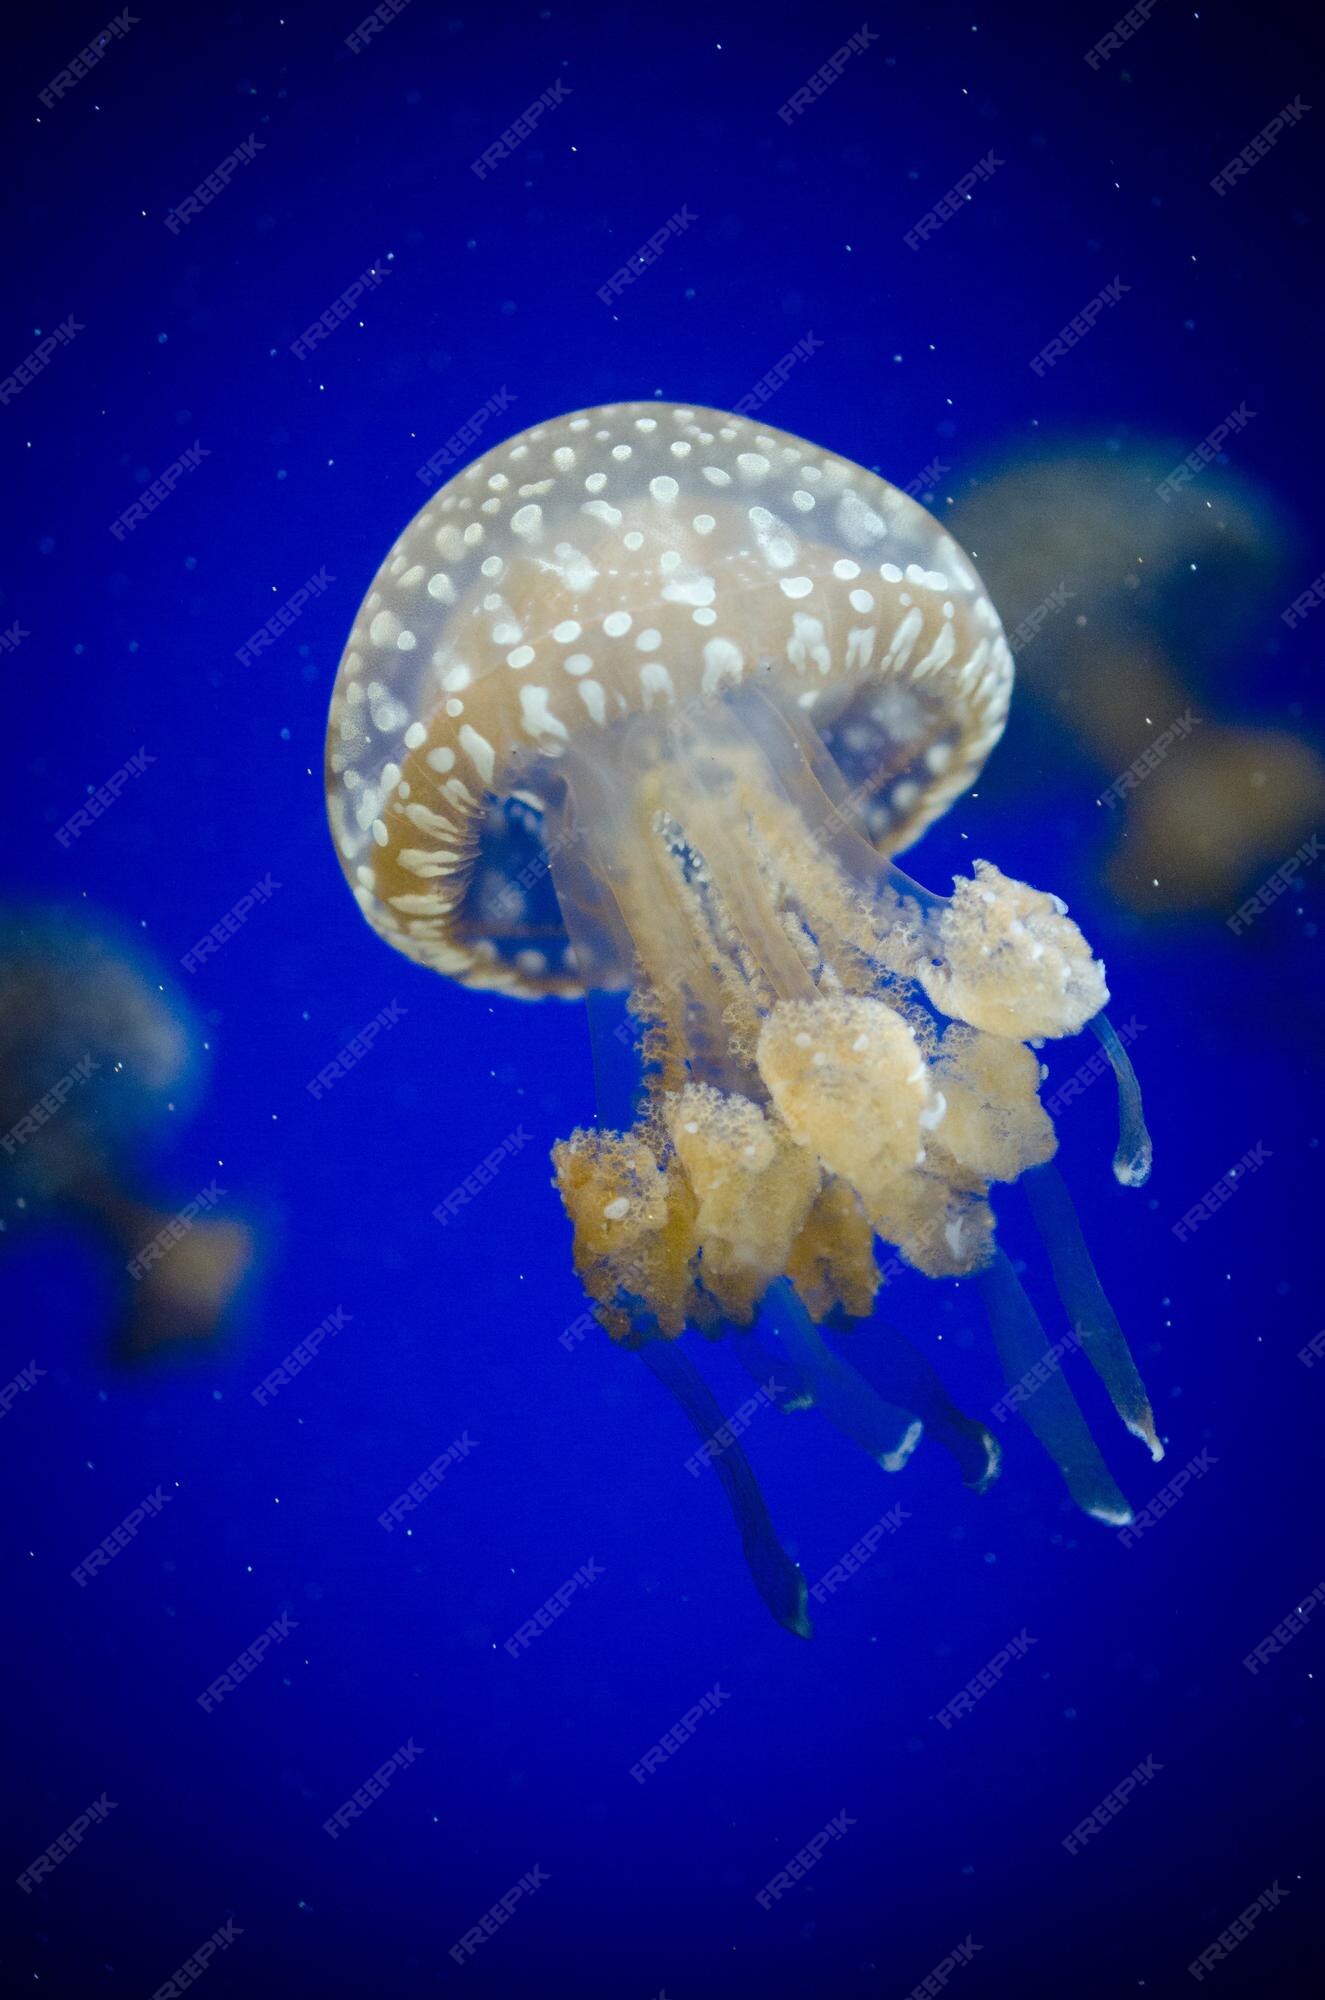 I. Introduction to Jellyfish: Ethereal Creatures of the Deep